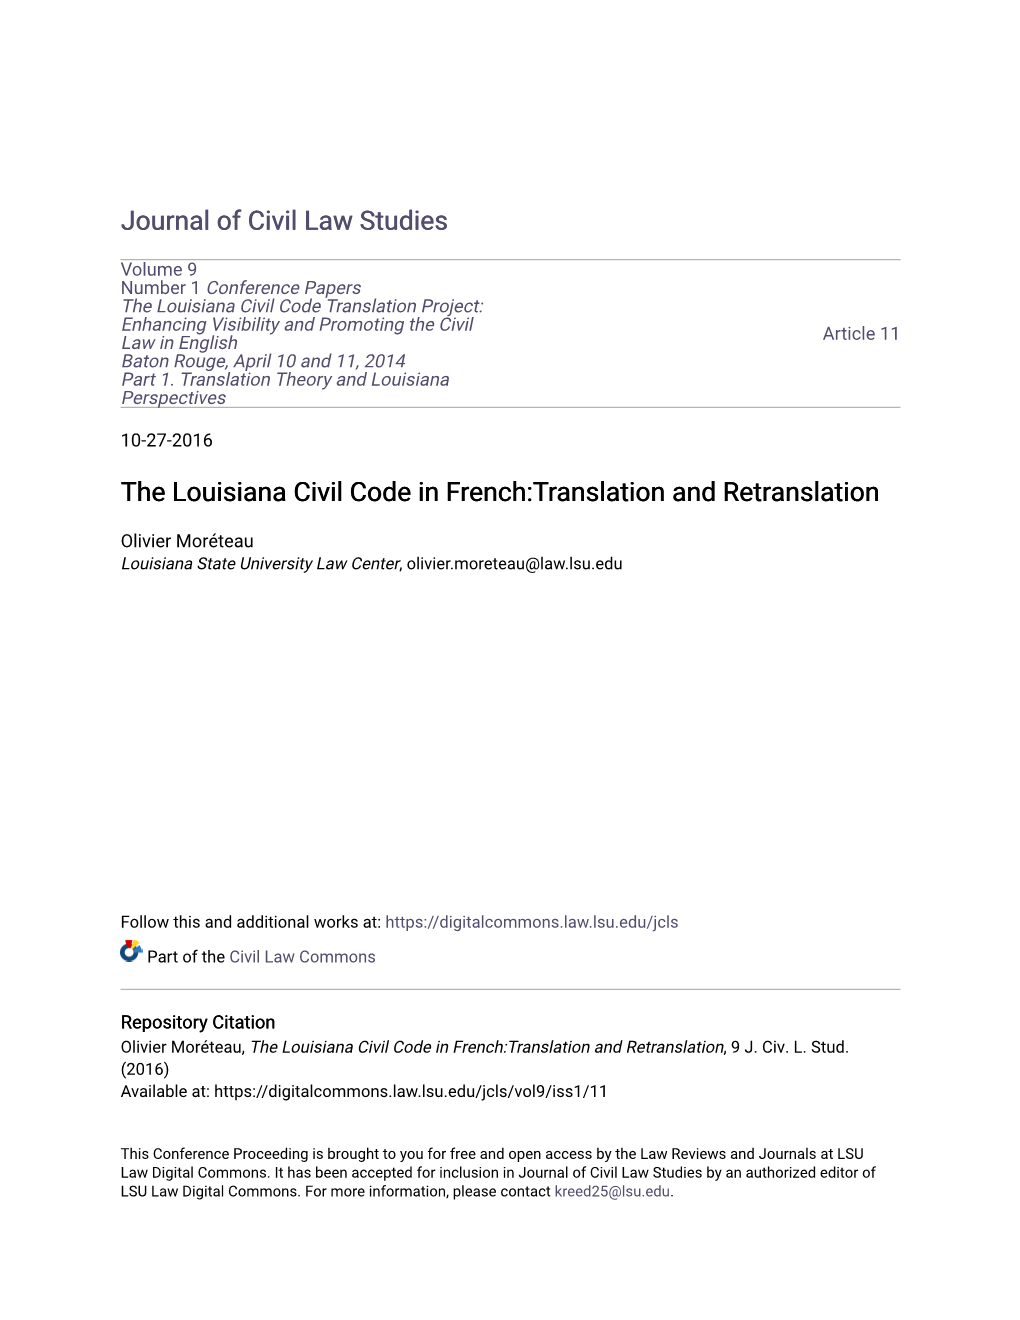 The Louisiana Civil Code in French:Translation and Retranslation